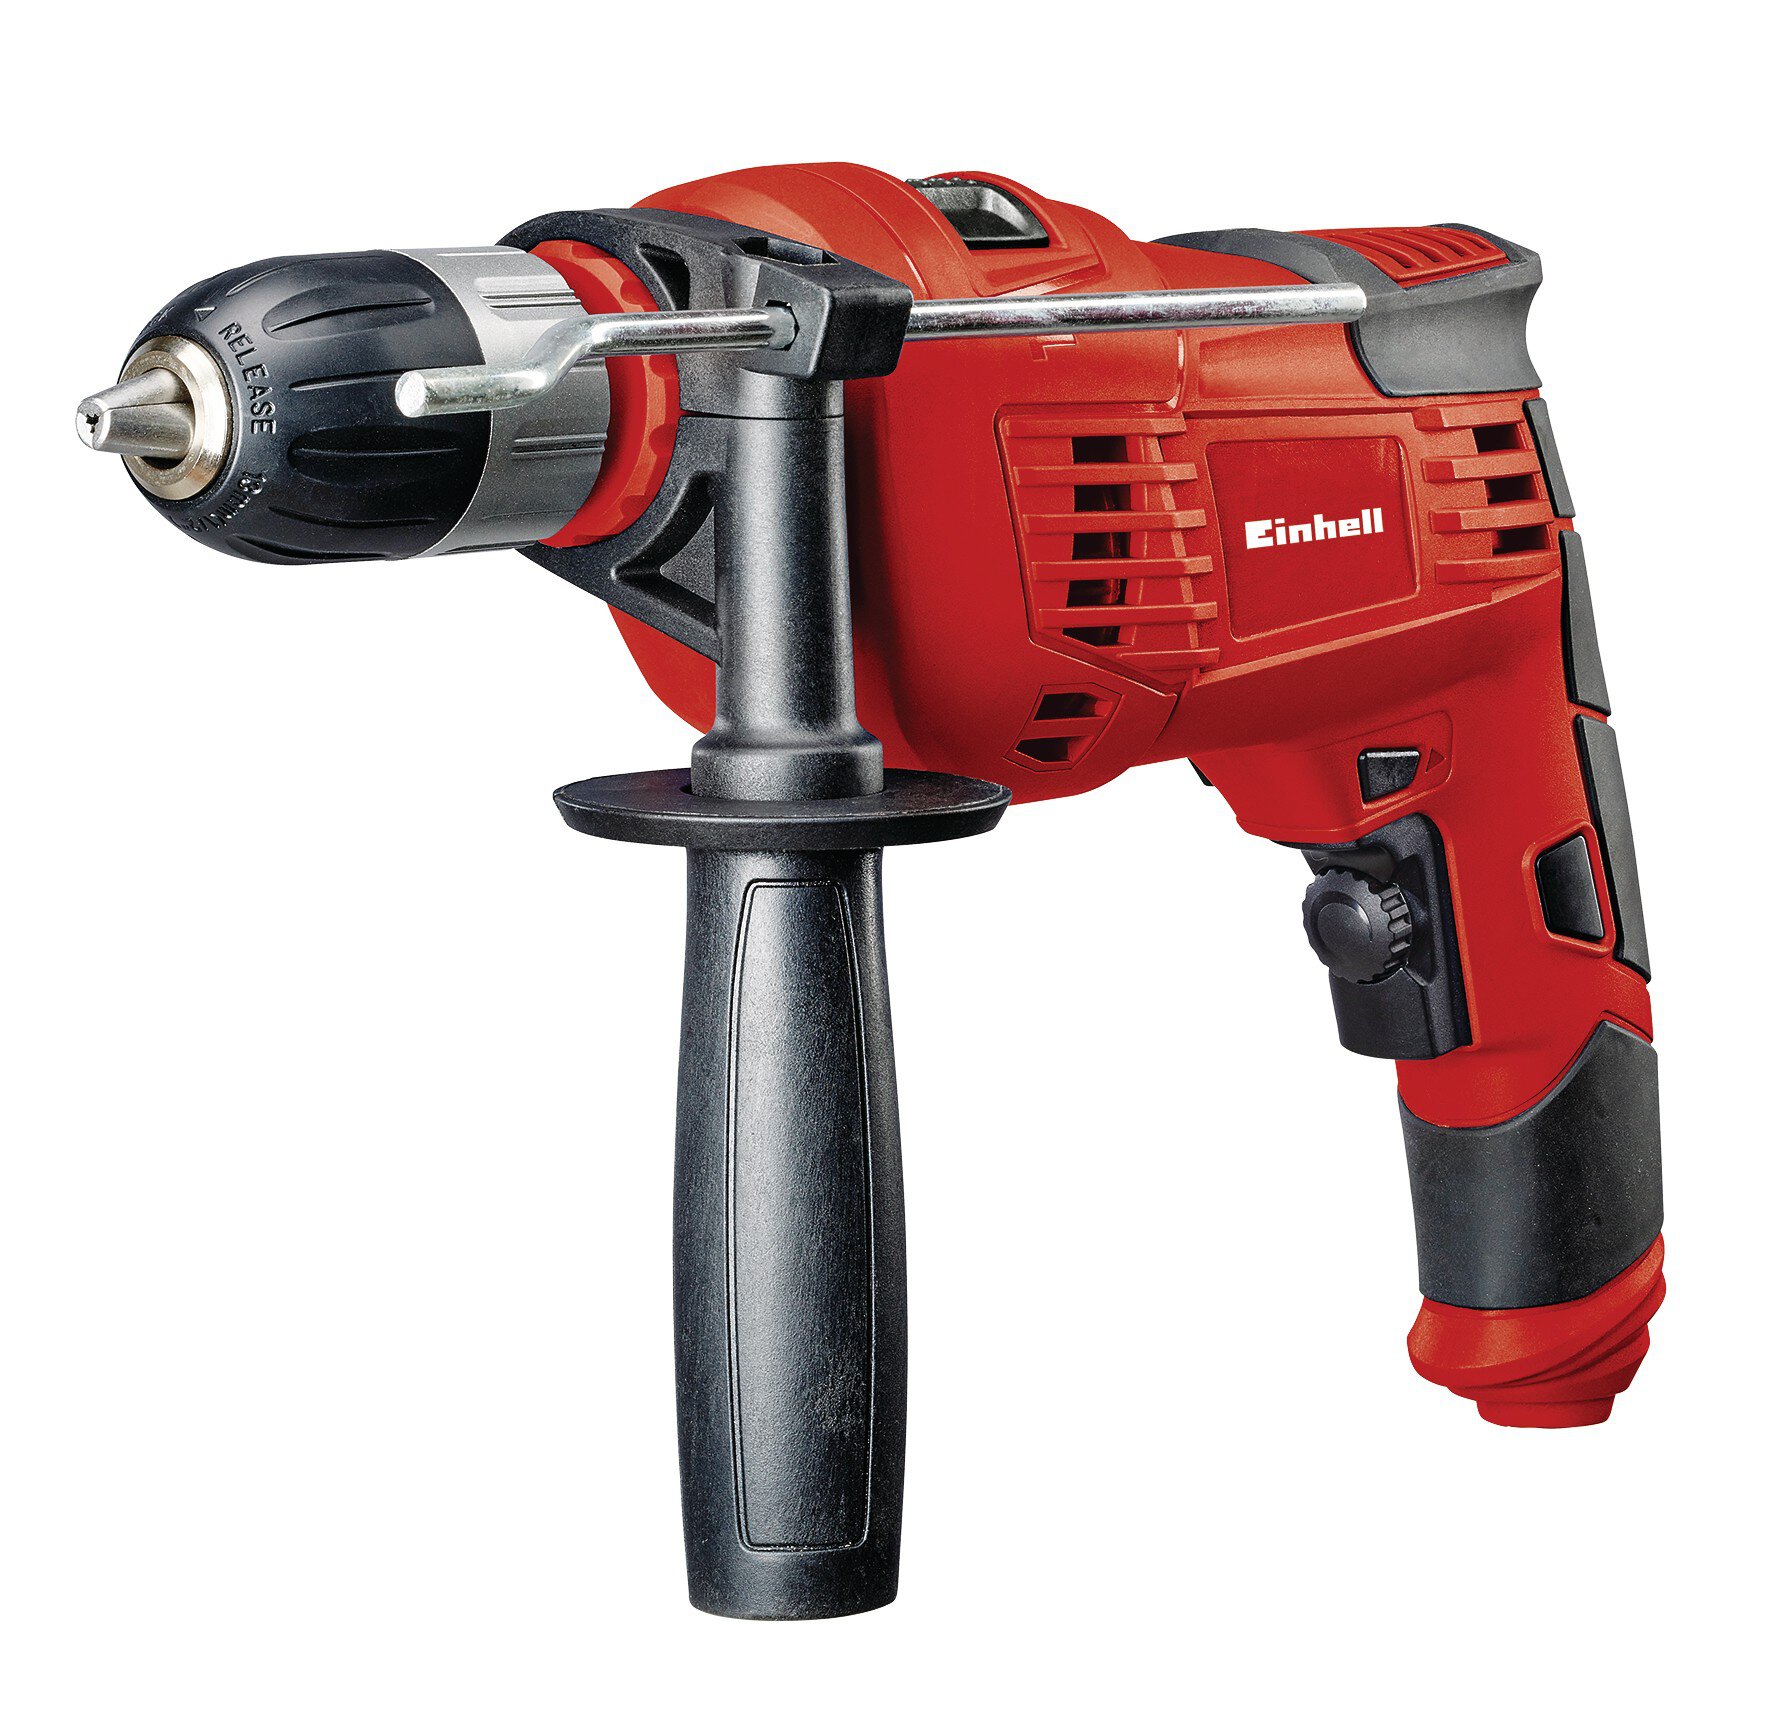 einhell-classic-impact-drill-4259838-productimage-001